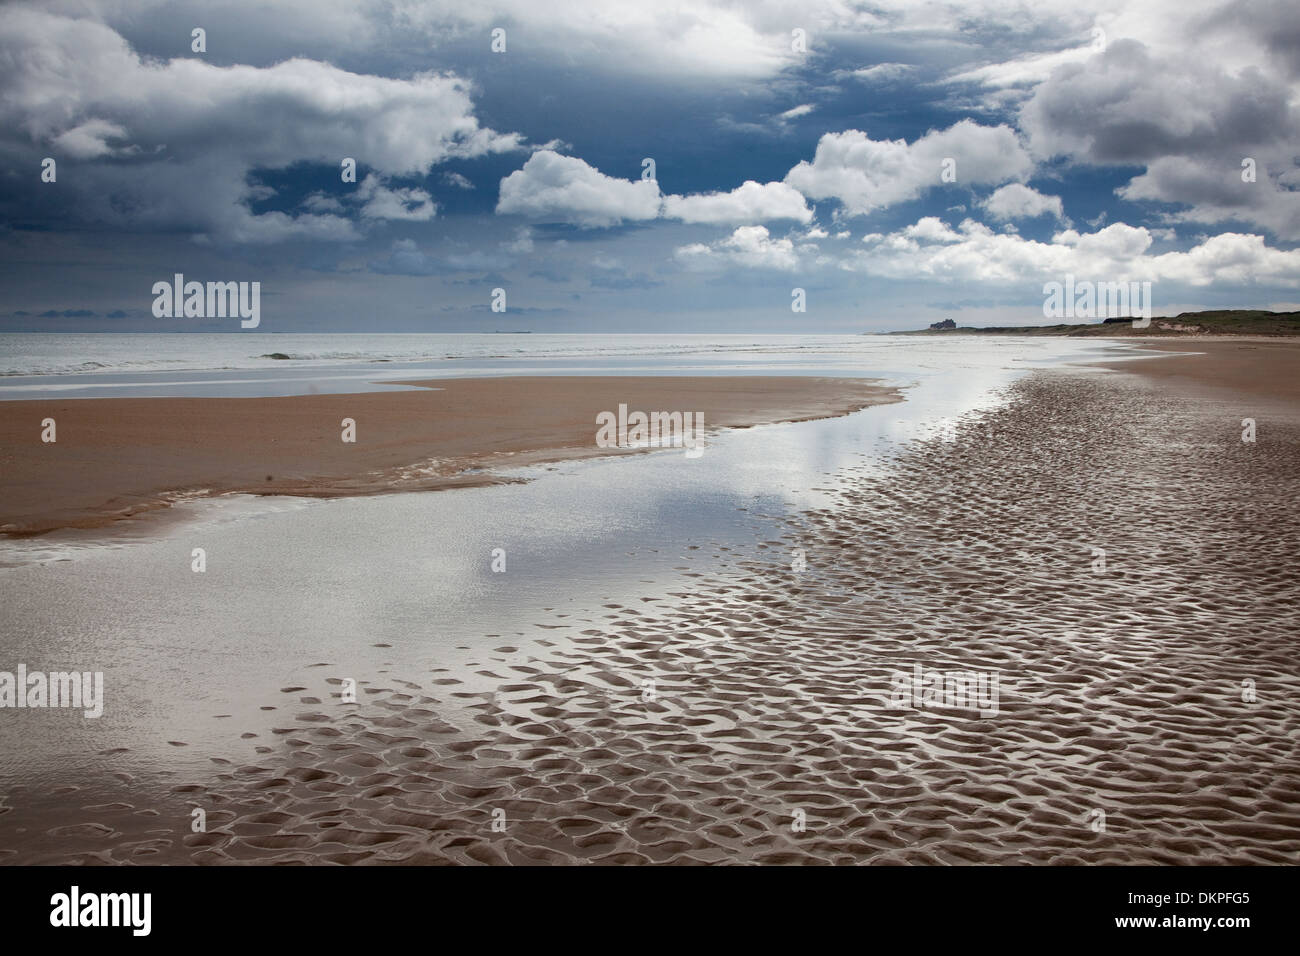 Clouds over beach at low tide Stock Photo